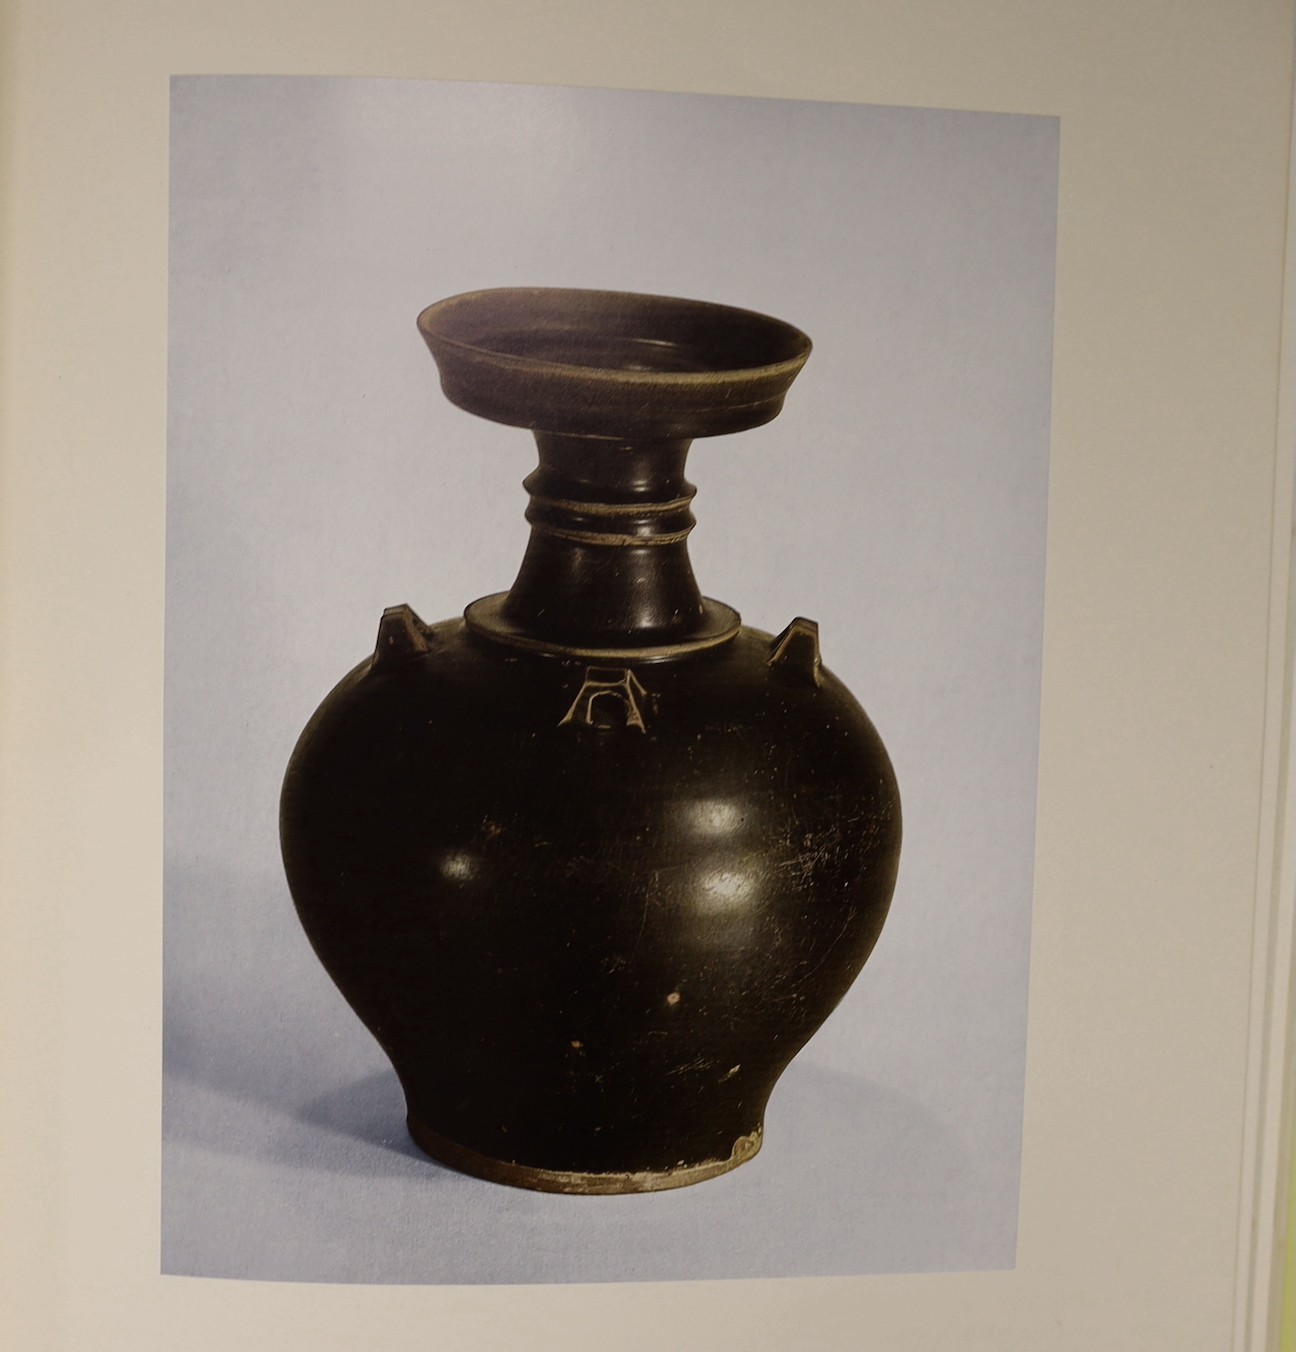 Shanghai Museum collection of Chinese ceramics, published 1979